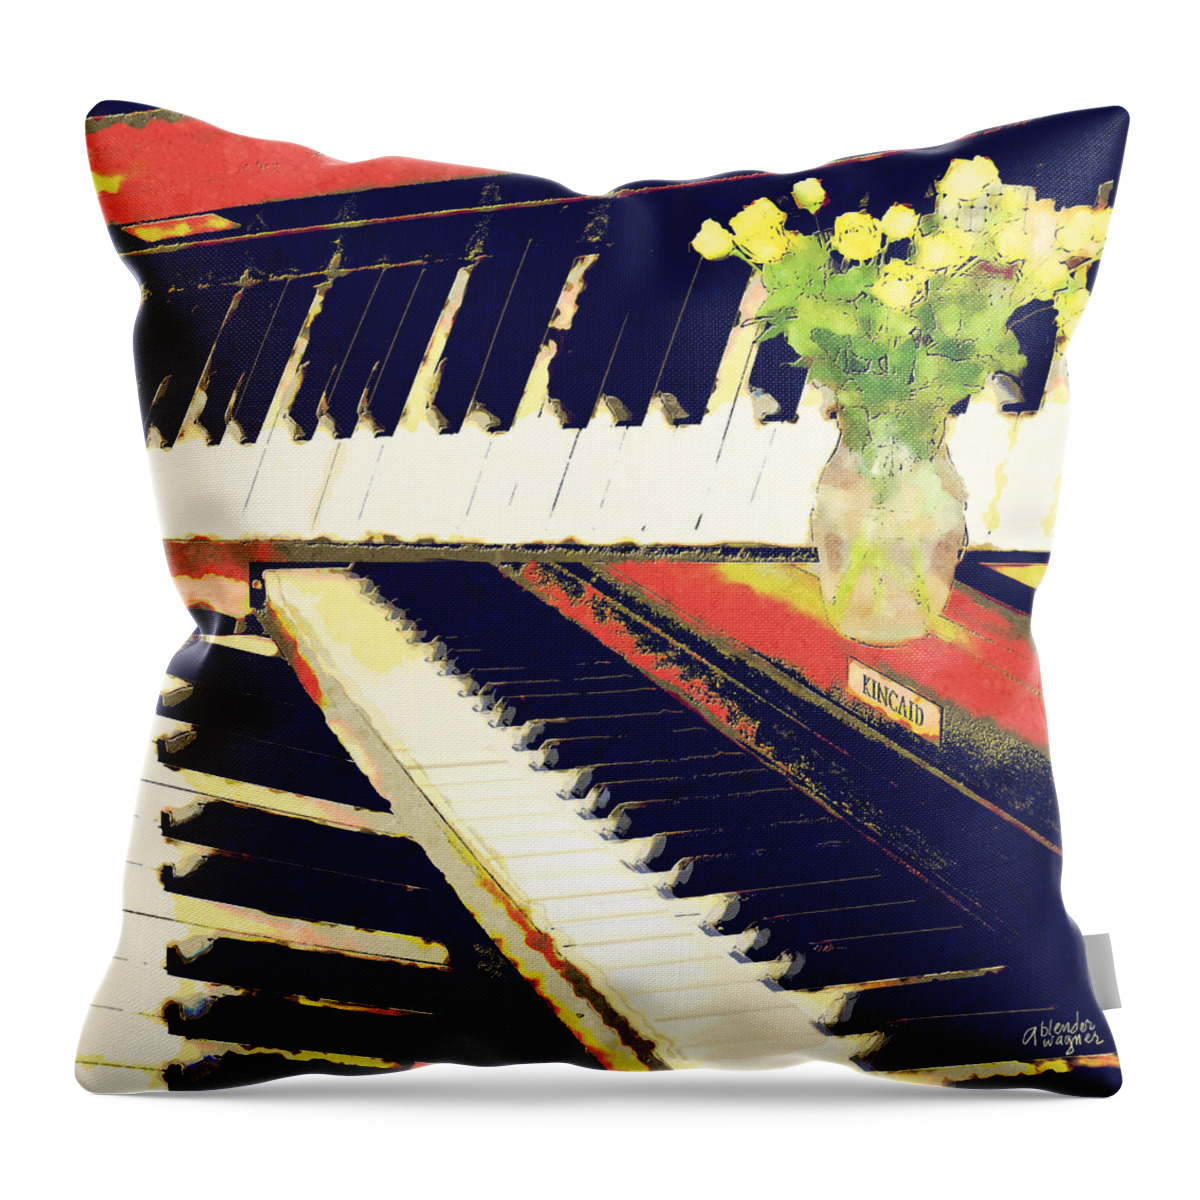 Piano Throw Pillow featuring the digital art Piano Keys by Arline Wagner